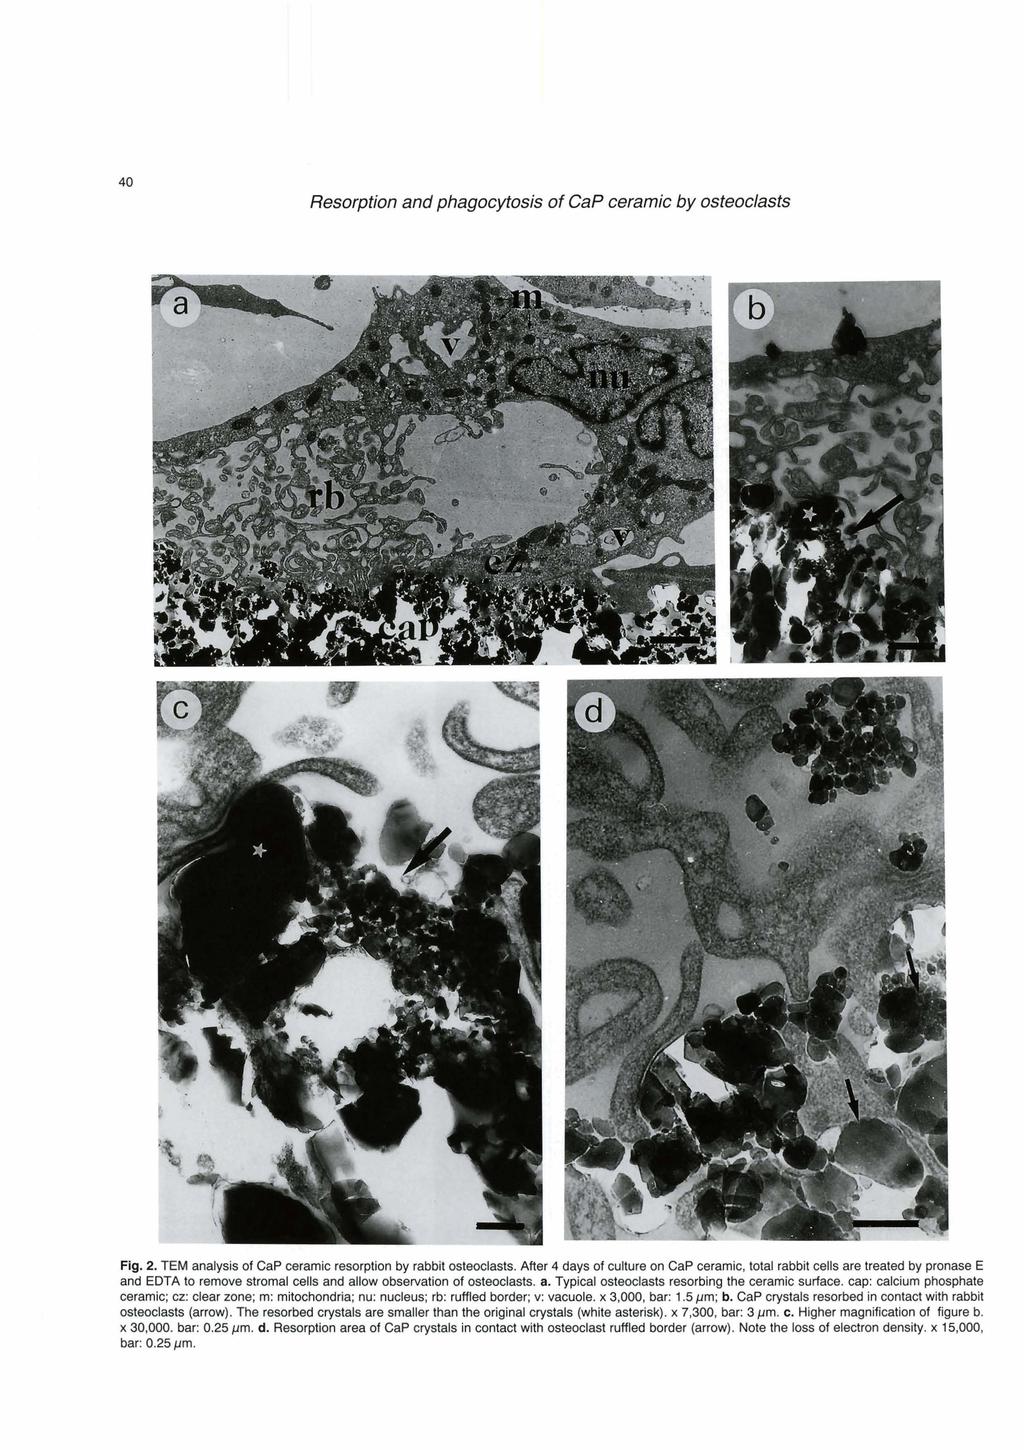 ,l.,.< Resorption and phagocytosis of Cap ceramic by osteoclasts L.i t.. a rt. I.b.. Flg. 2. TEM analysis of Cap ceramic resorption by rabbii osteoclasts.